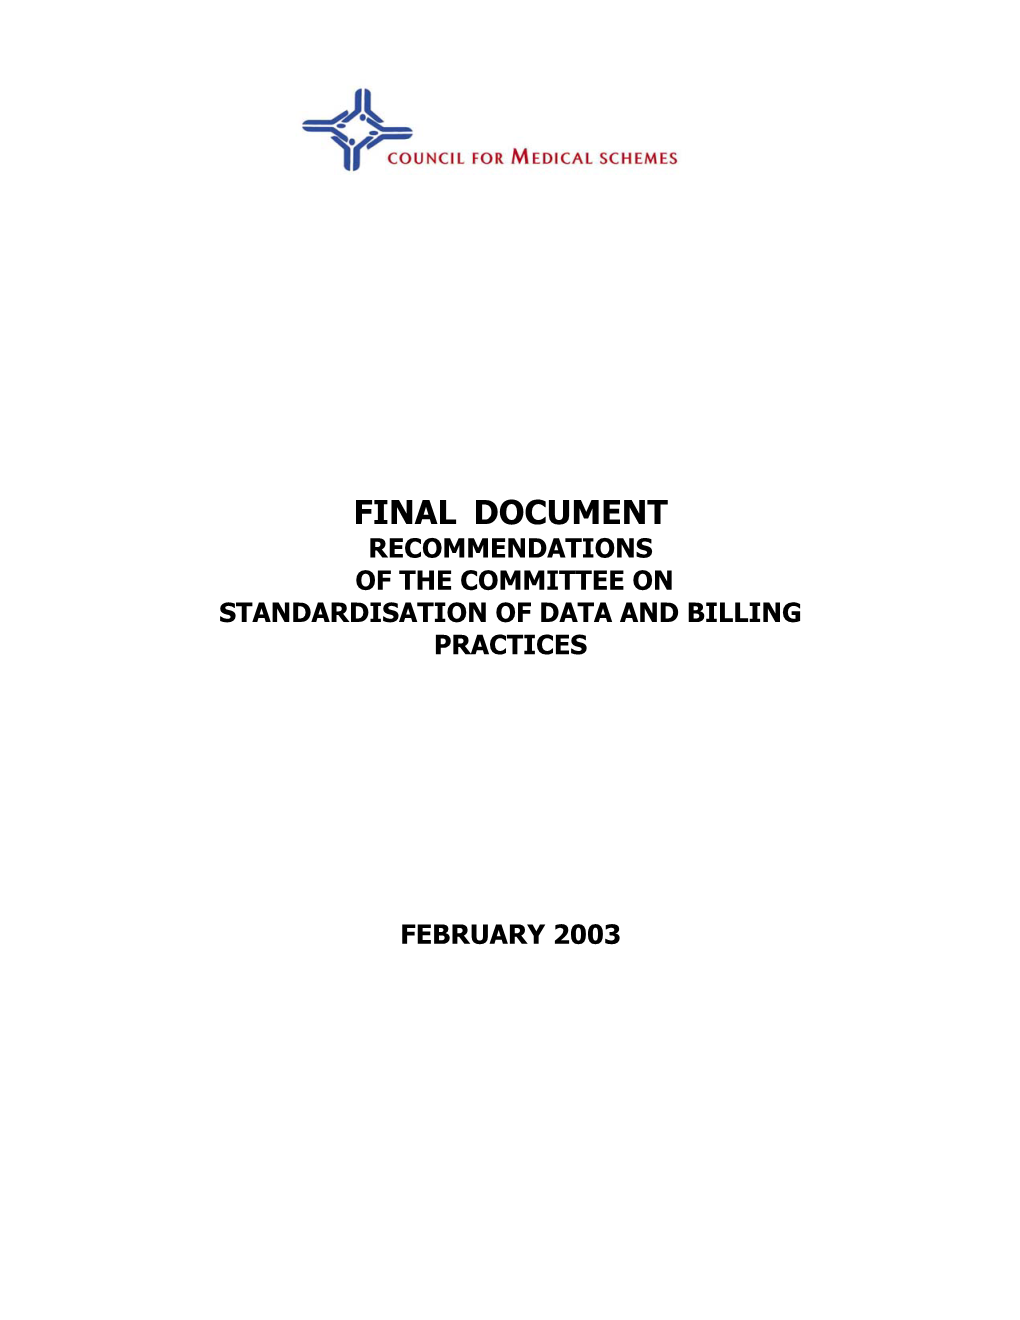 Final Document Recommendations of the Committee on Standardisation of Data and Billing Practices